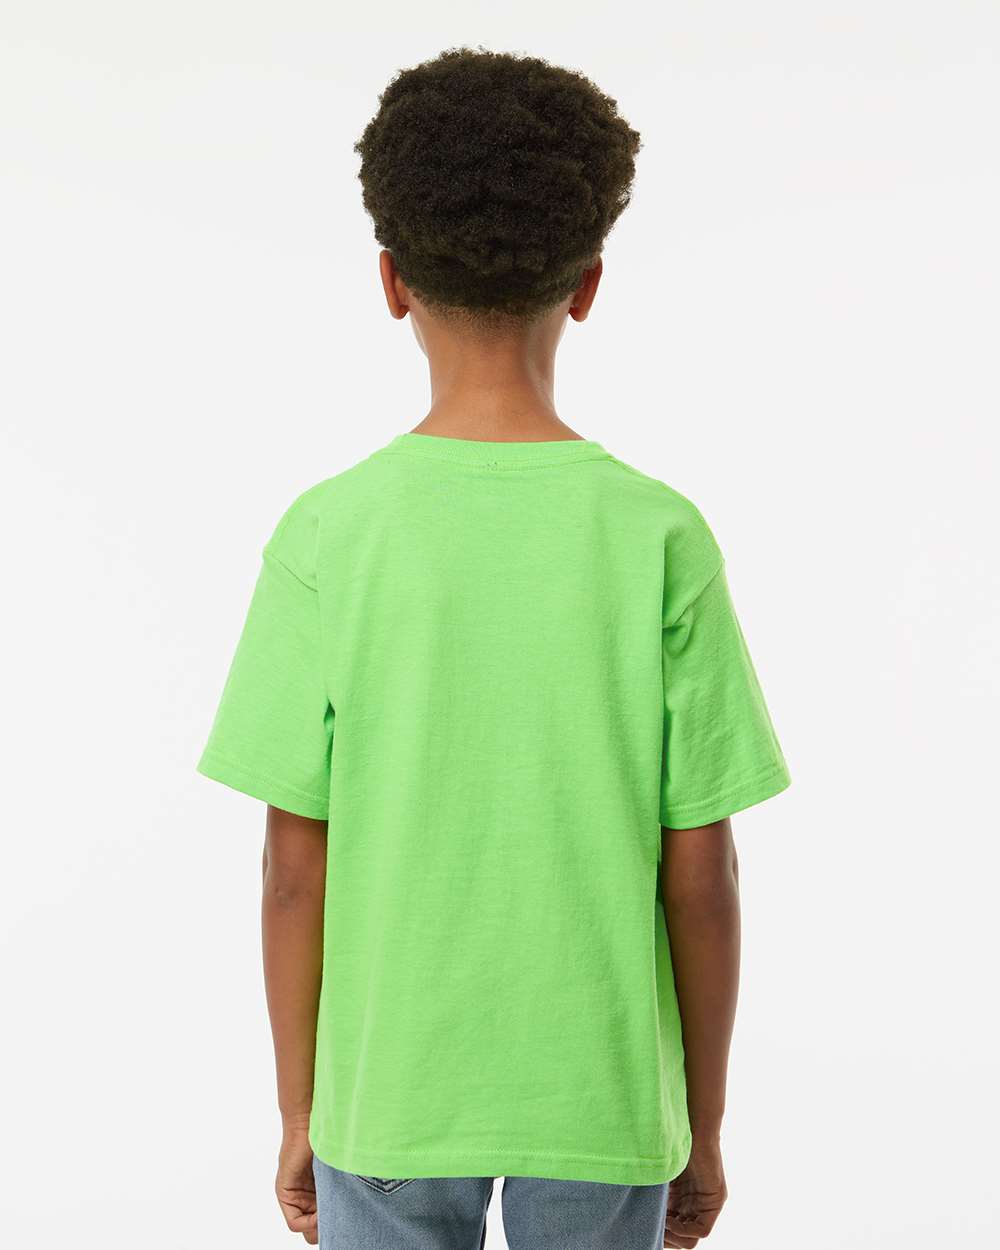 M&O Youth Gold Soft Touch T-Shirt 4850 #colormdl_Vivid Lime